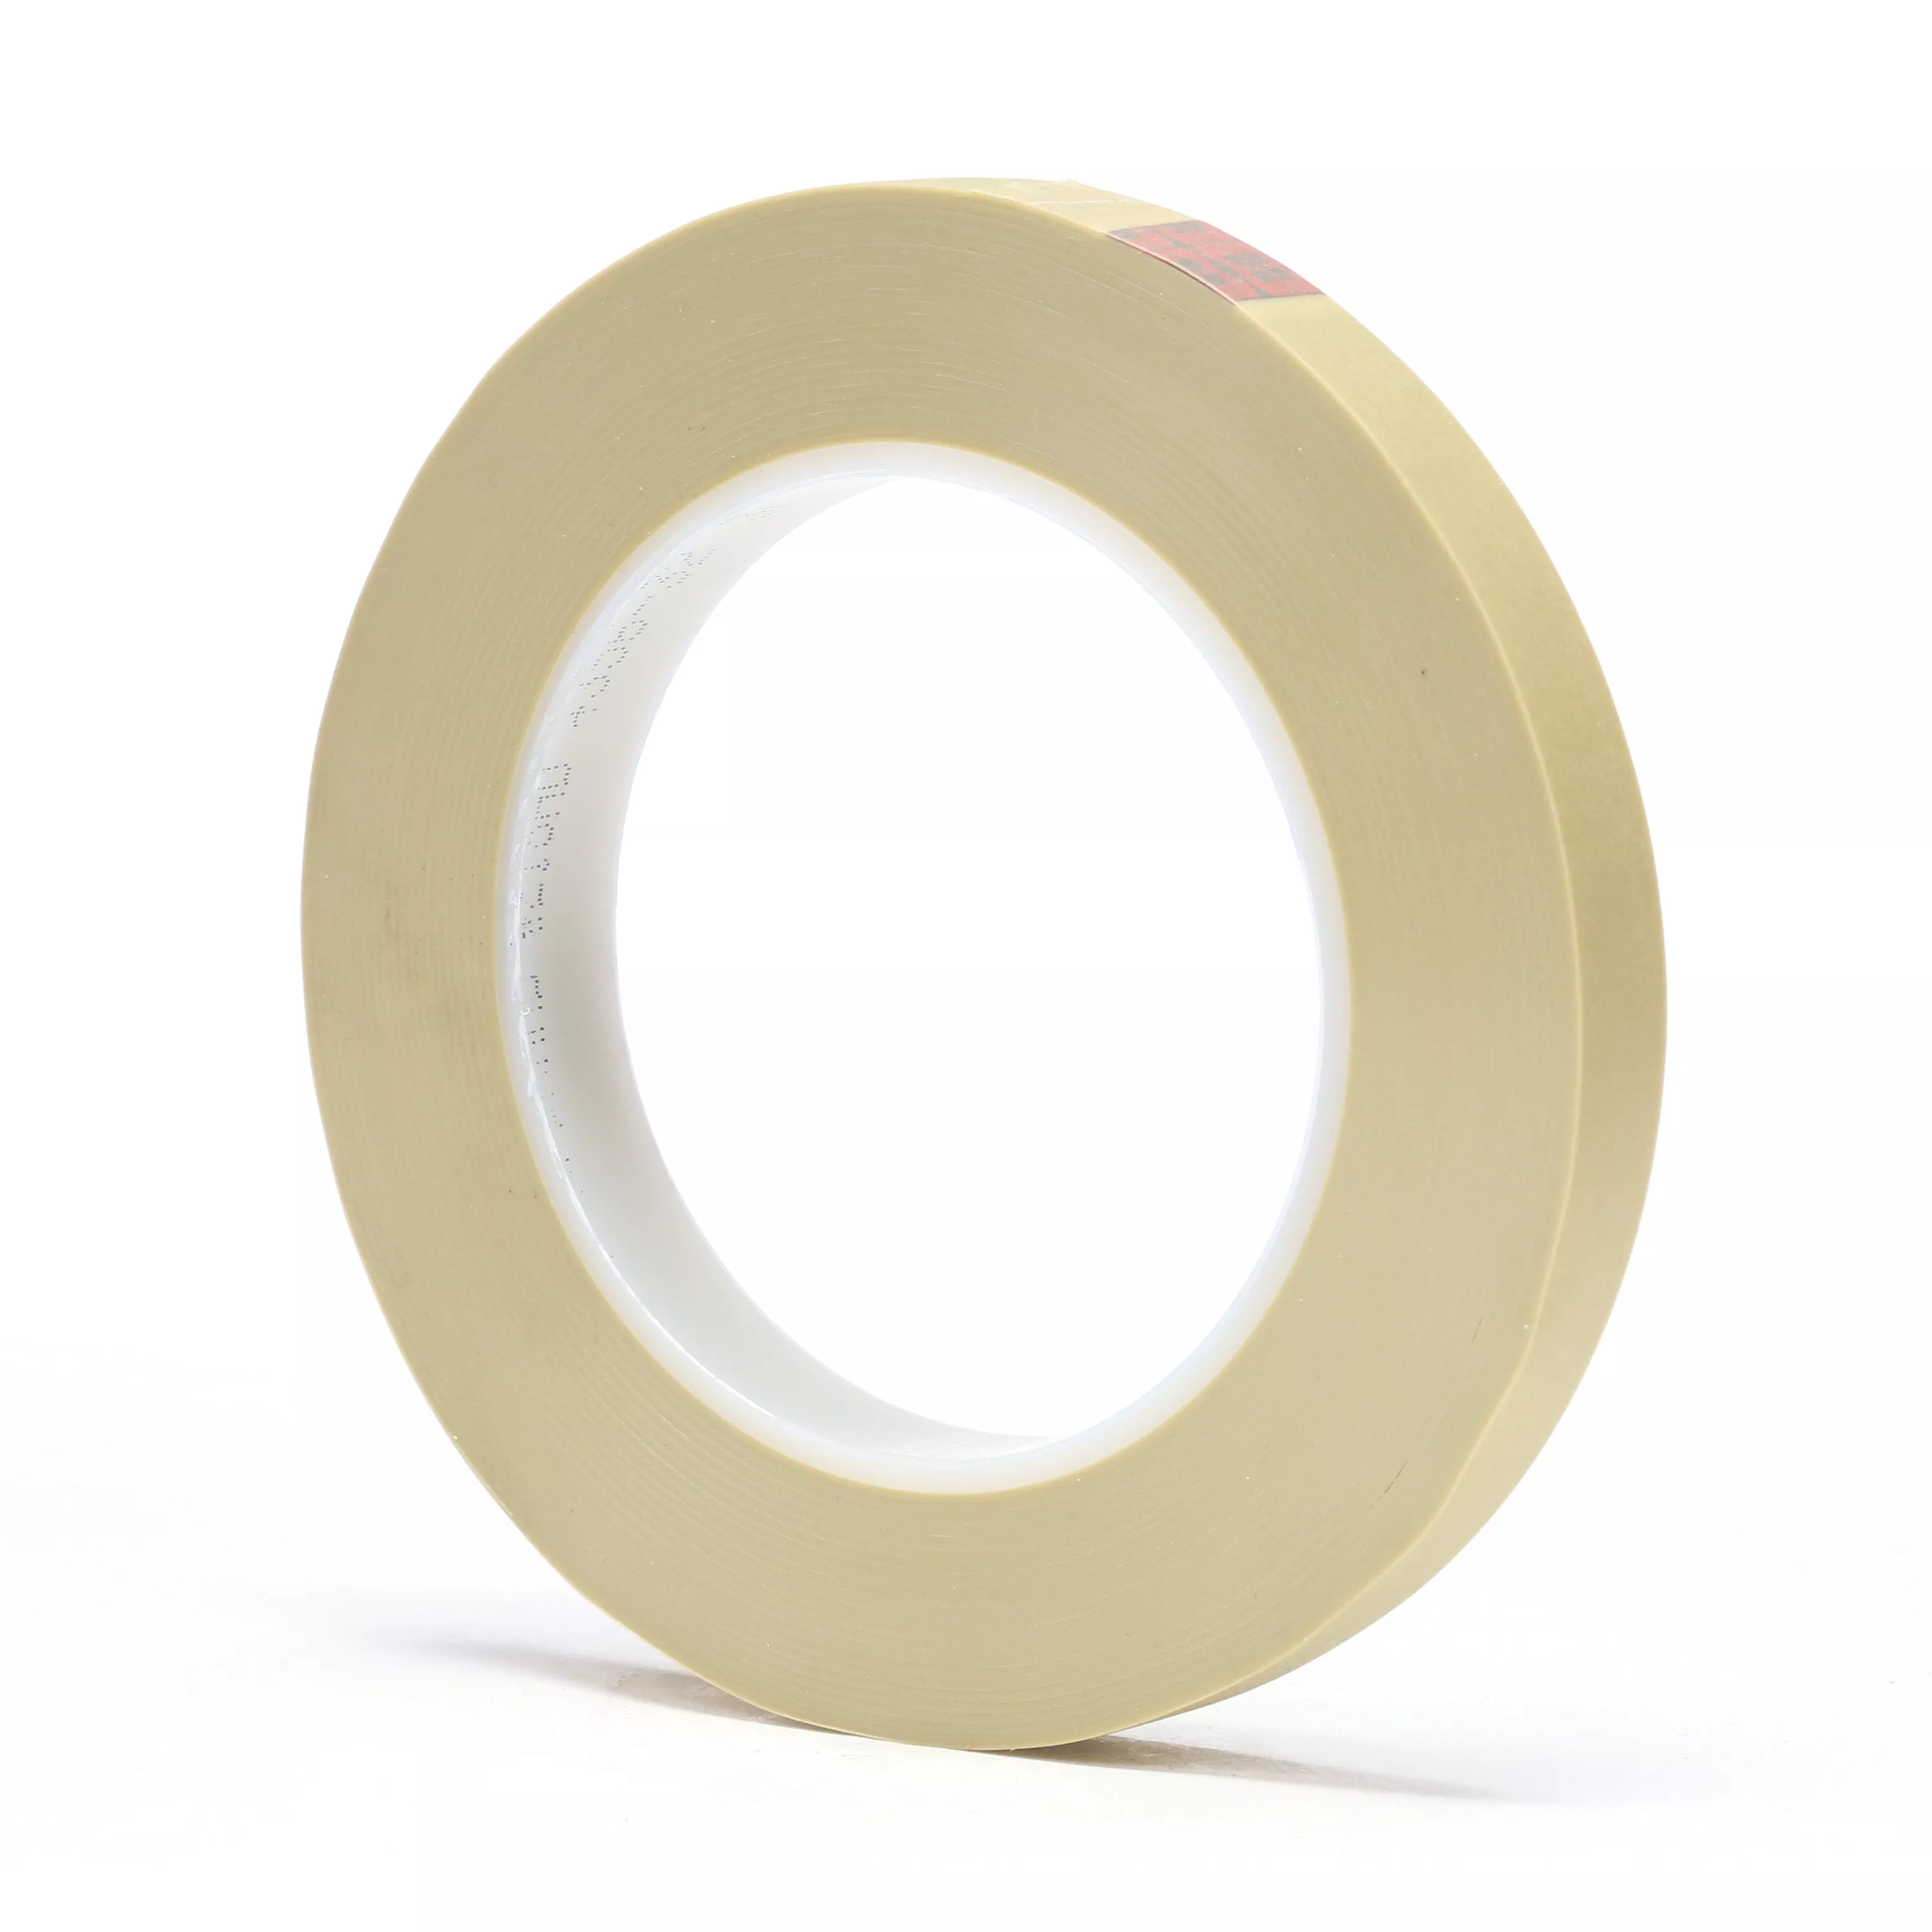 Product Number 218 | Scotch® Fine Line Tape 218